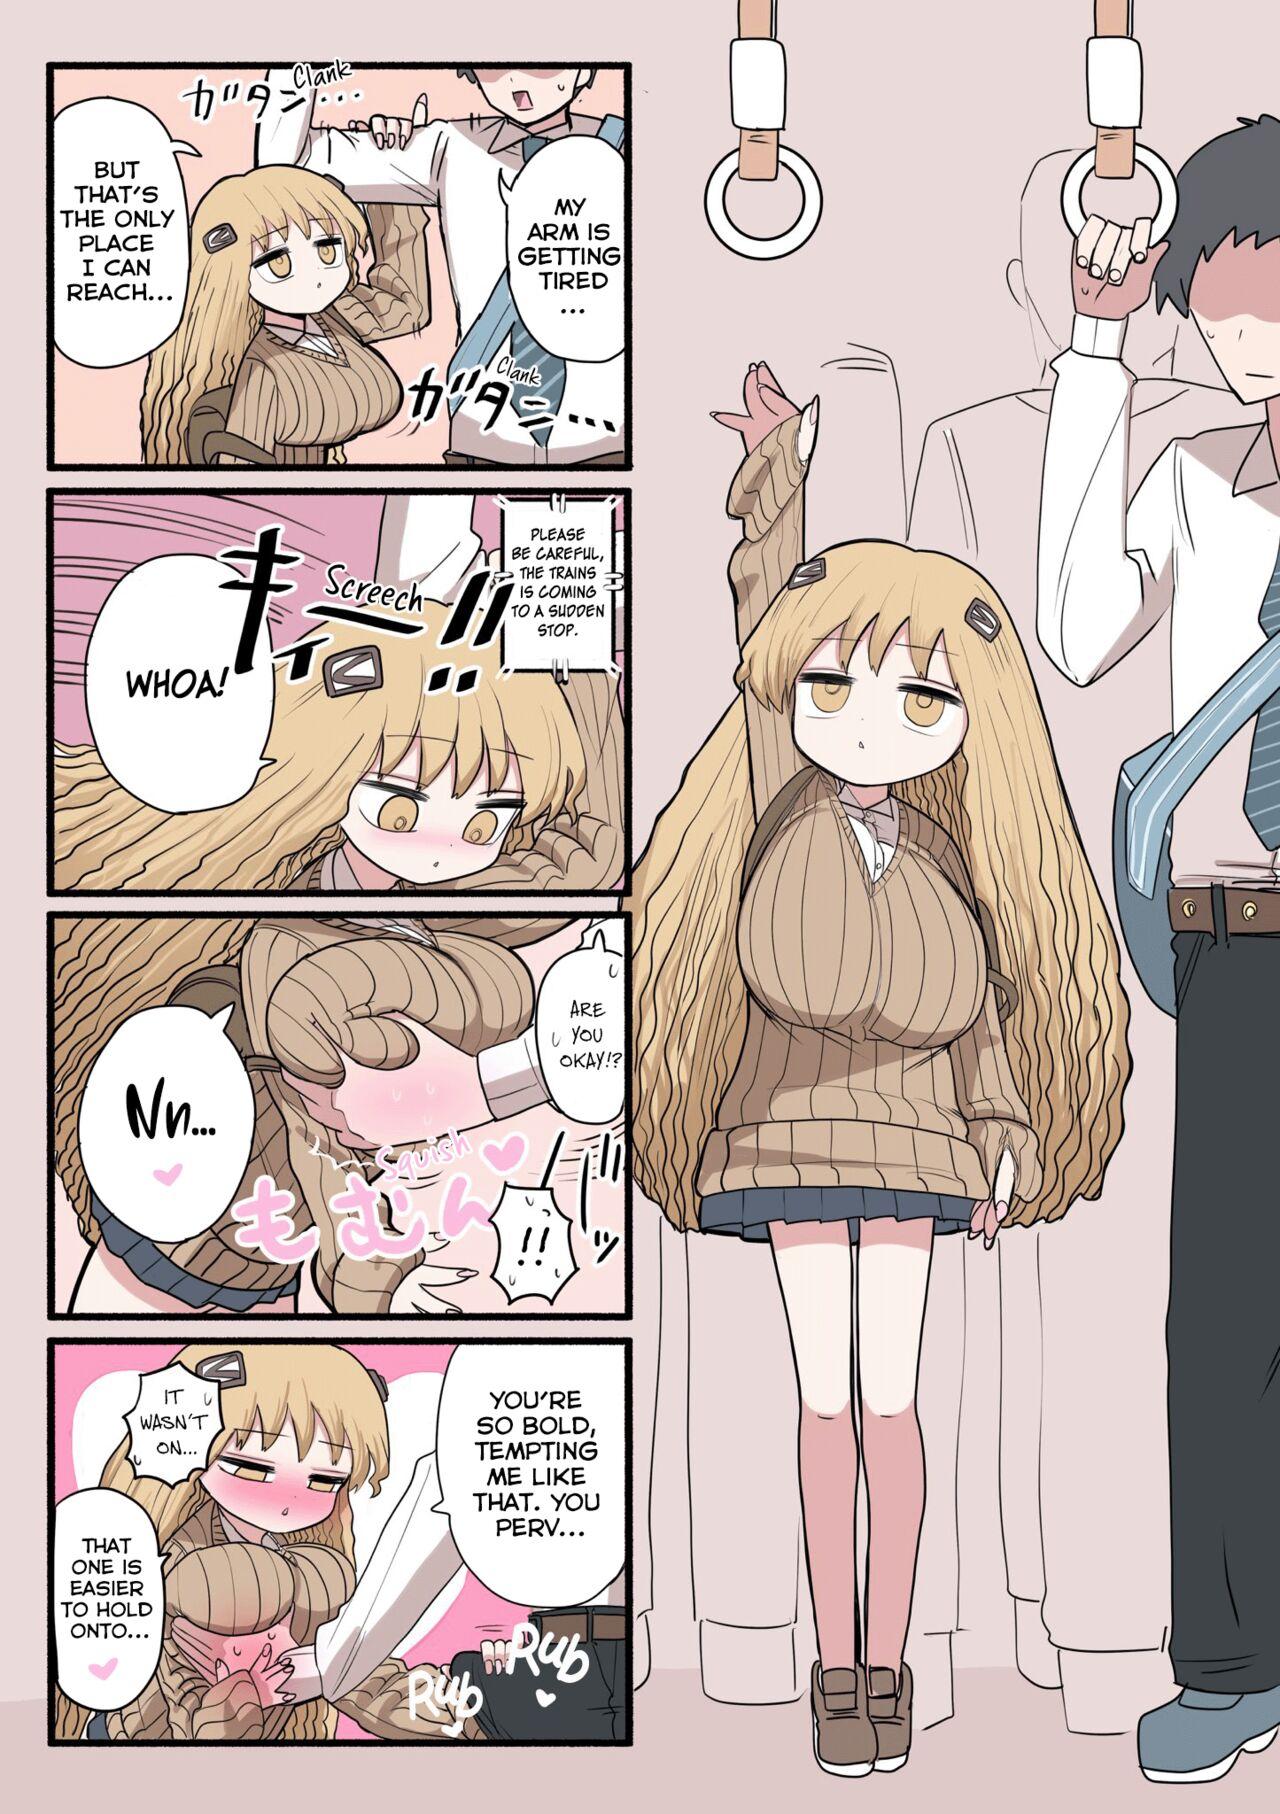 Lips Chisai Gal | Small Gal - Original Youporn - Page 6